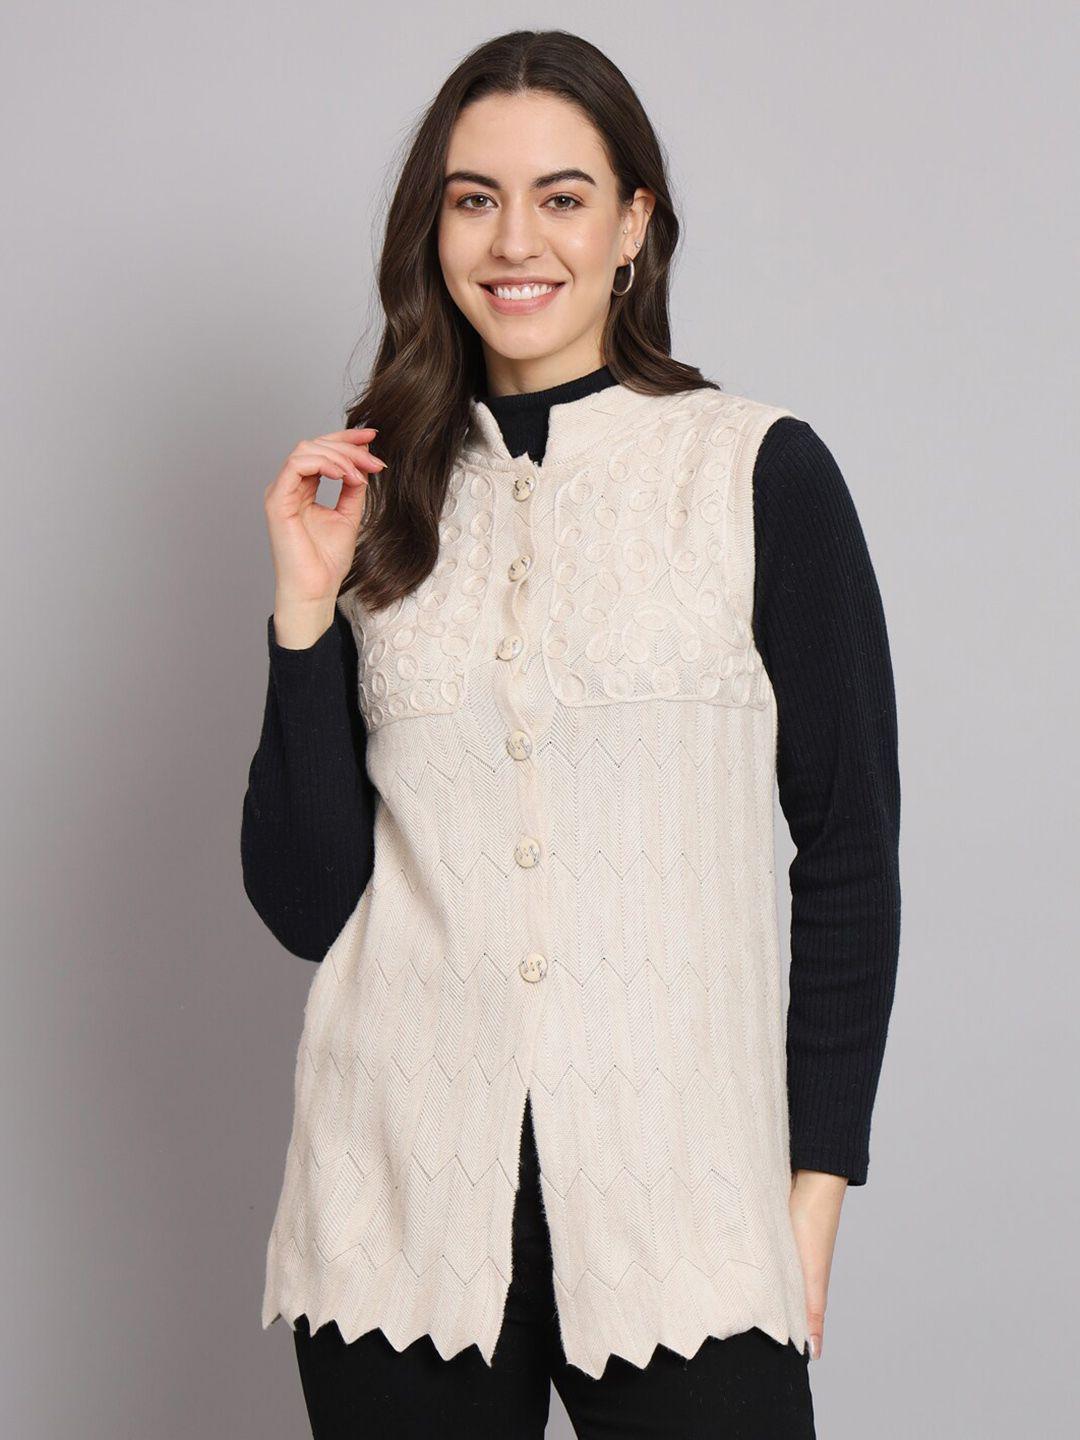 ewools embroidered woollen sleeveless front-open sweaters